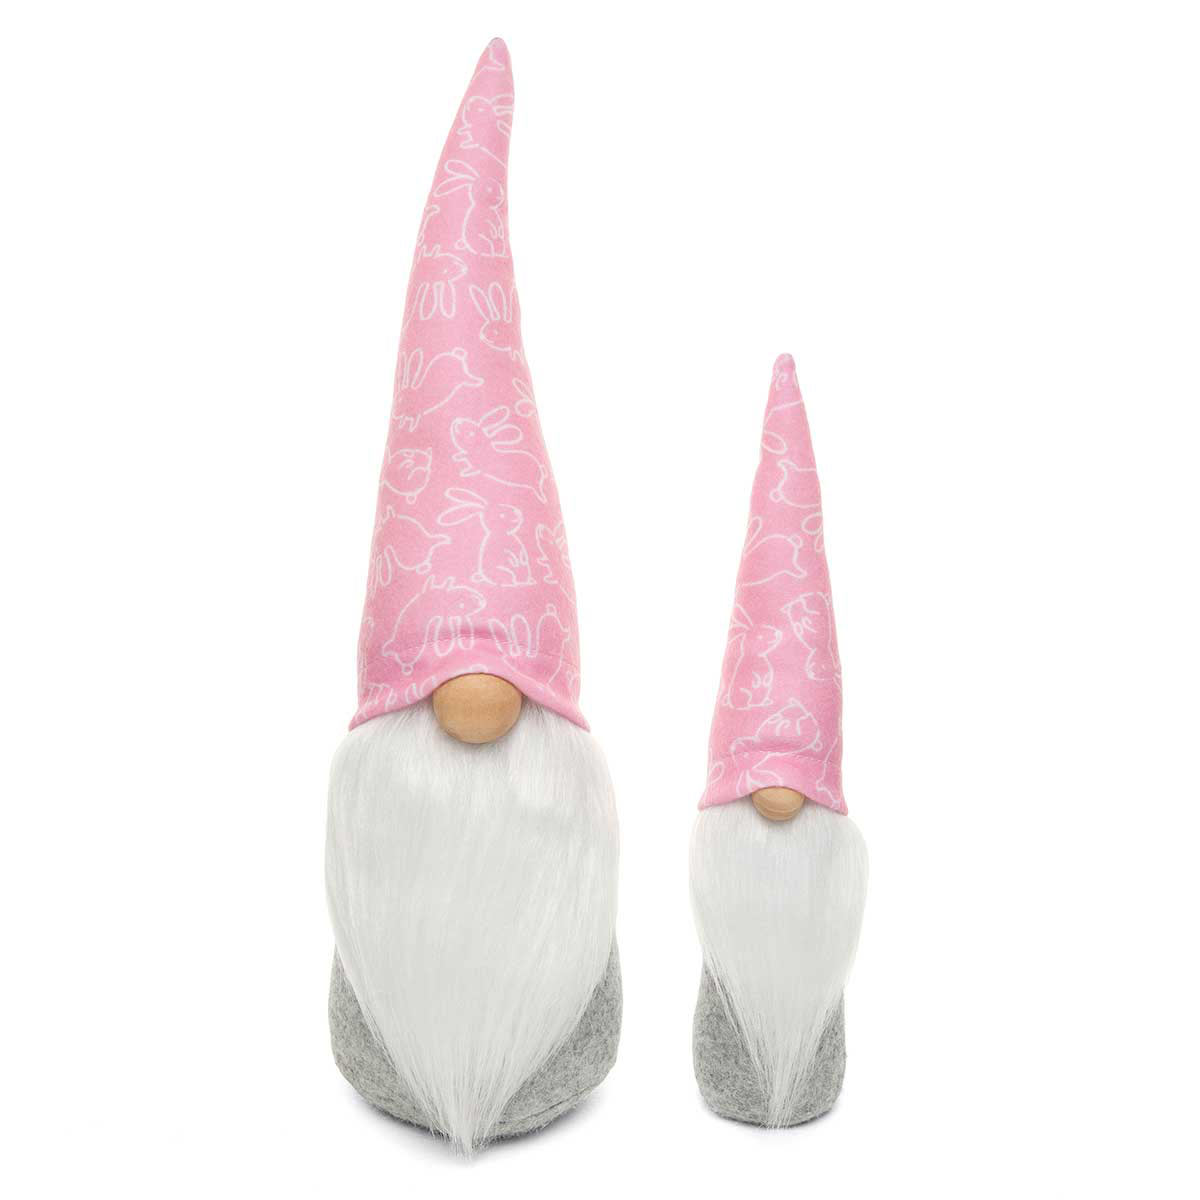 b70 GNOME BUNNY PRINT HAT 1.75IN X 2IN X 10IN PINK/GREY